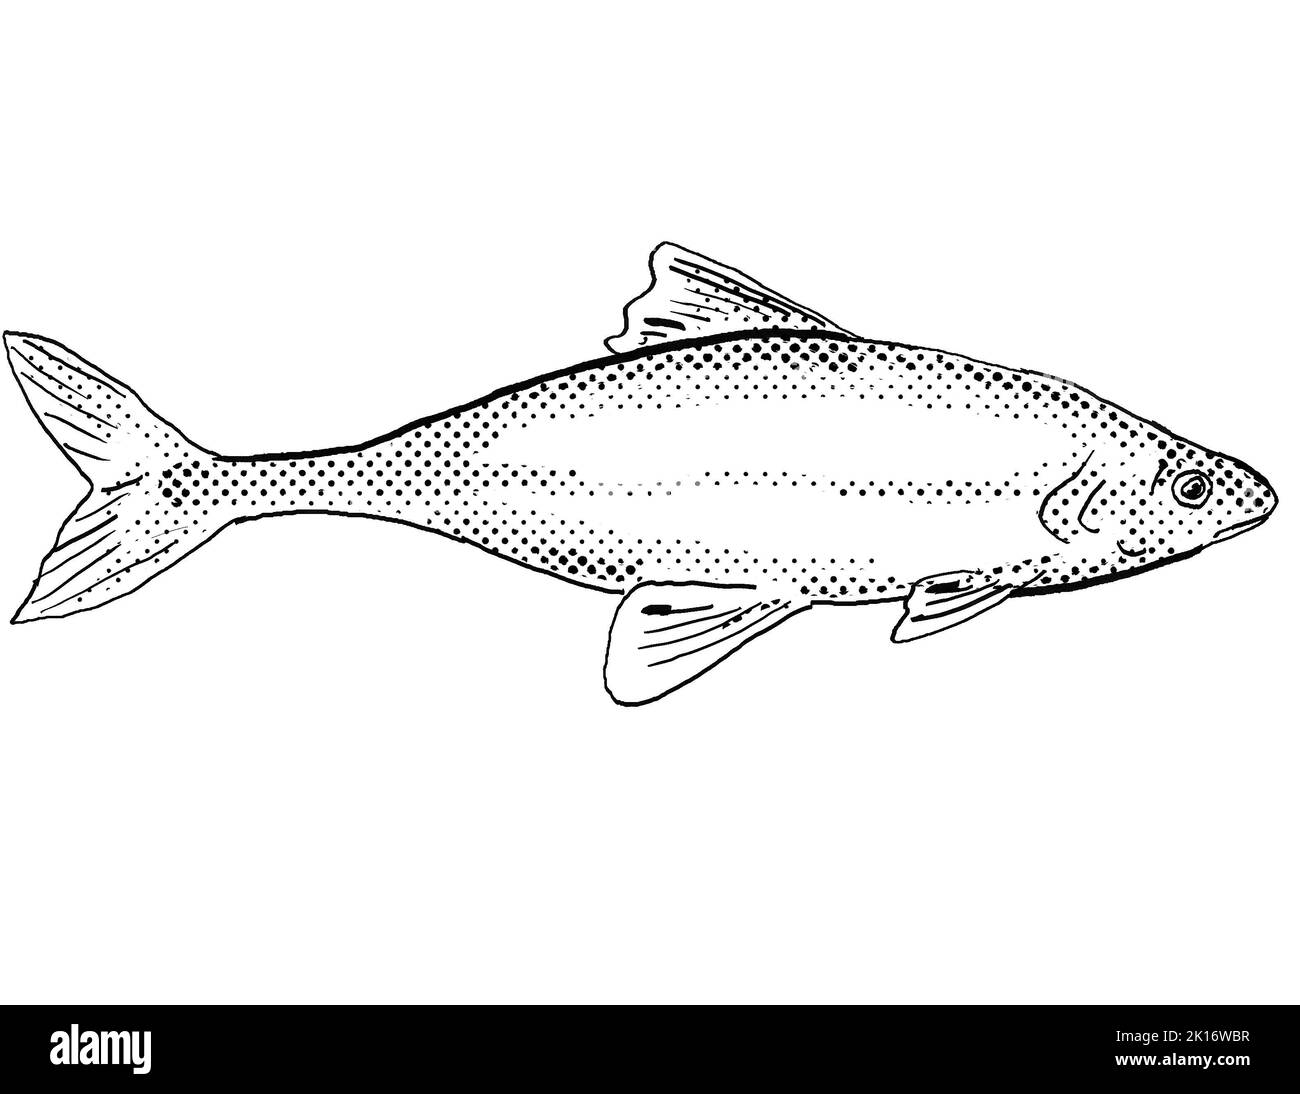 Cartoon style line drawing of a bonytail chub or bonytail or Gila elegans freshwater fish found in North America with halftone dots on isolated backgr Stock Photo